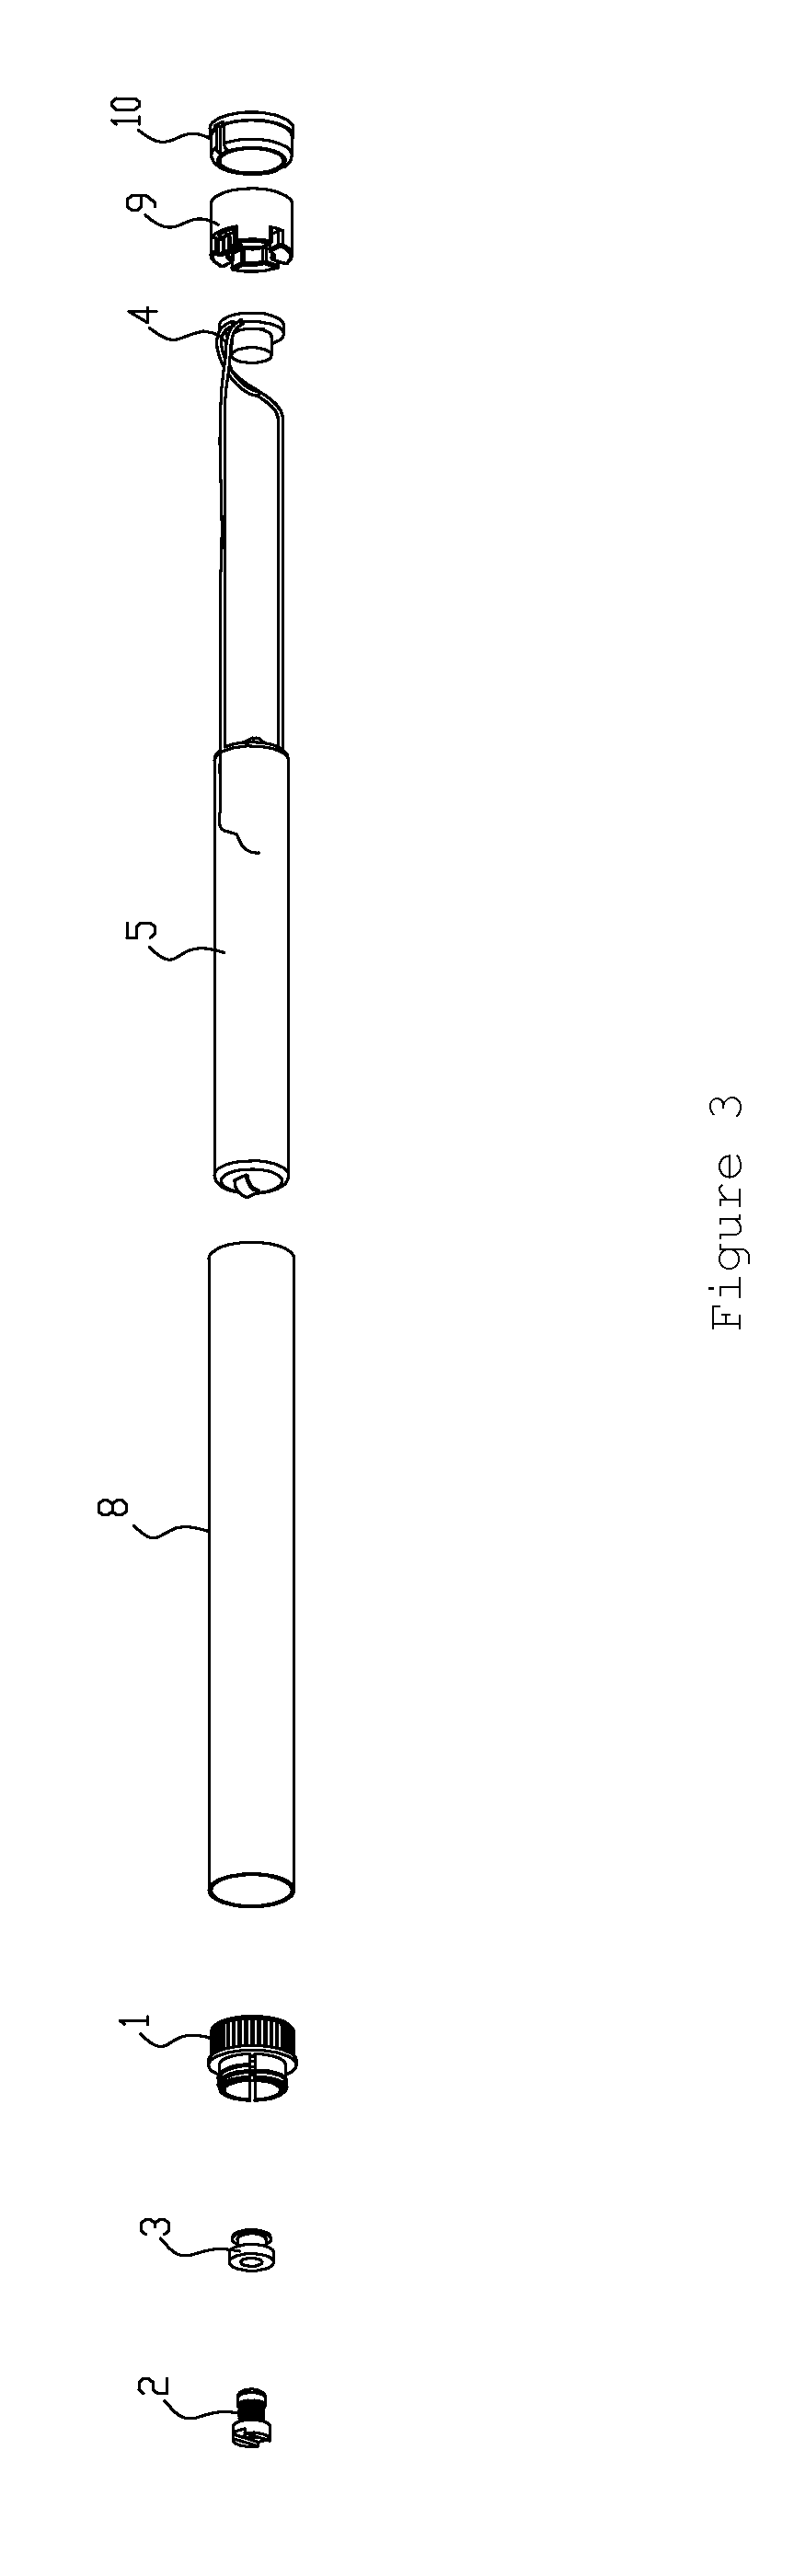 Power Supply Device for Electronic Cigarette